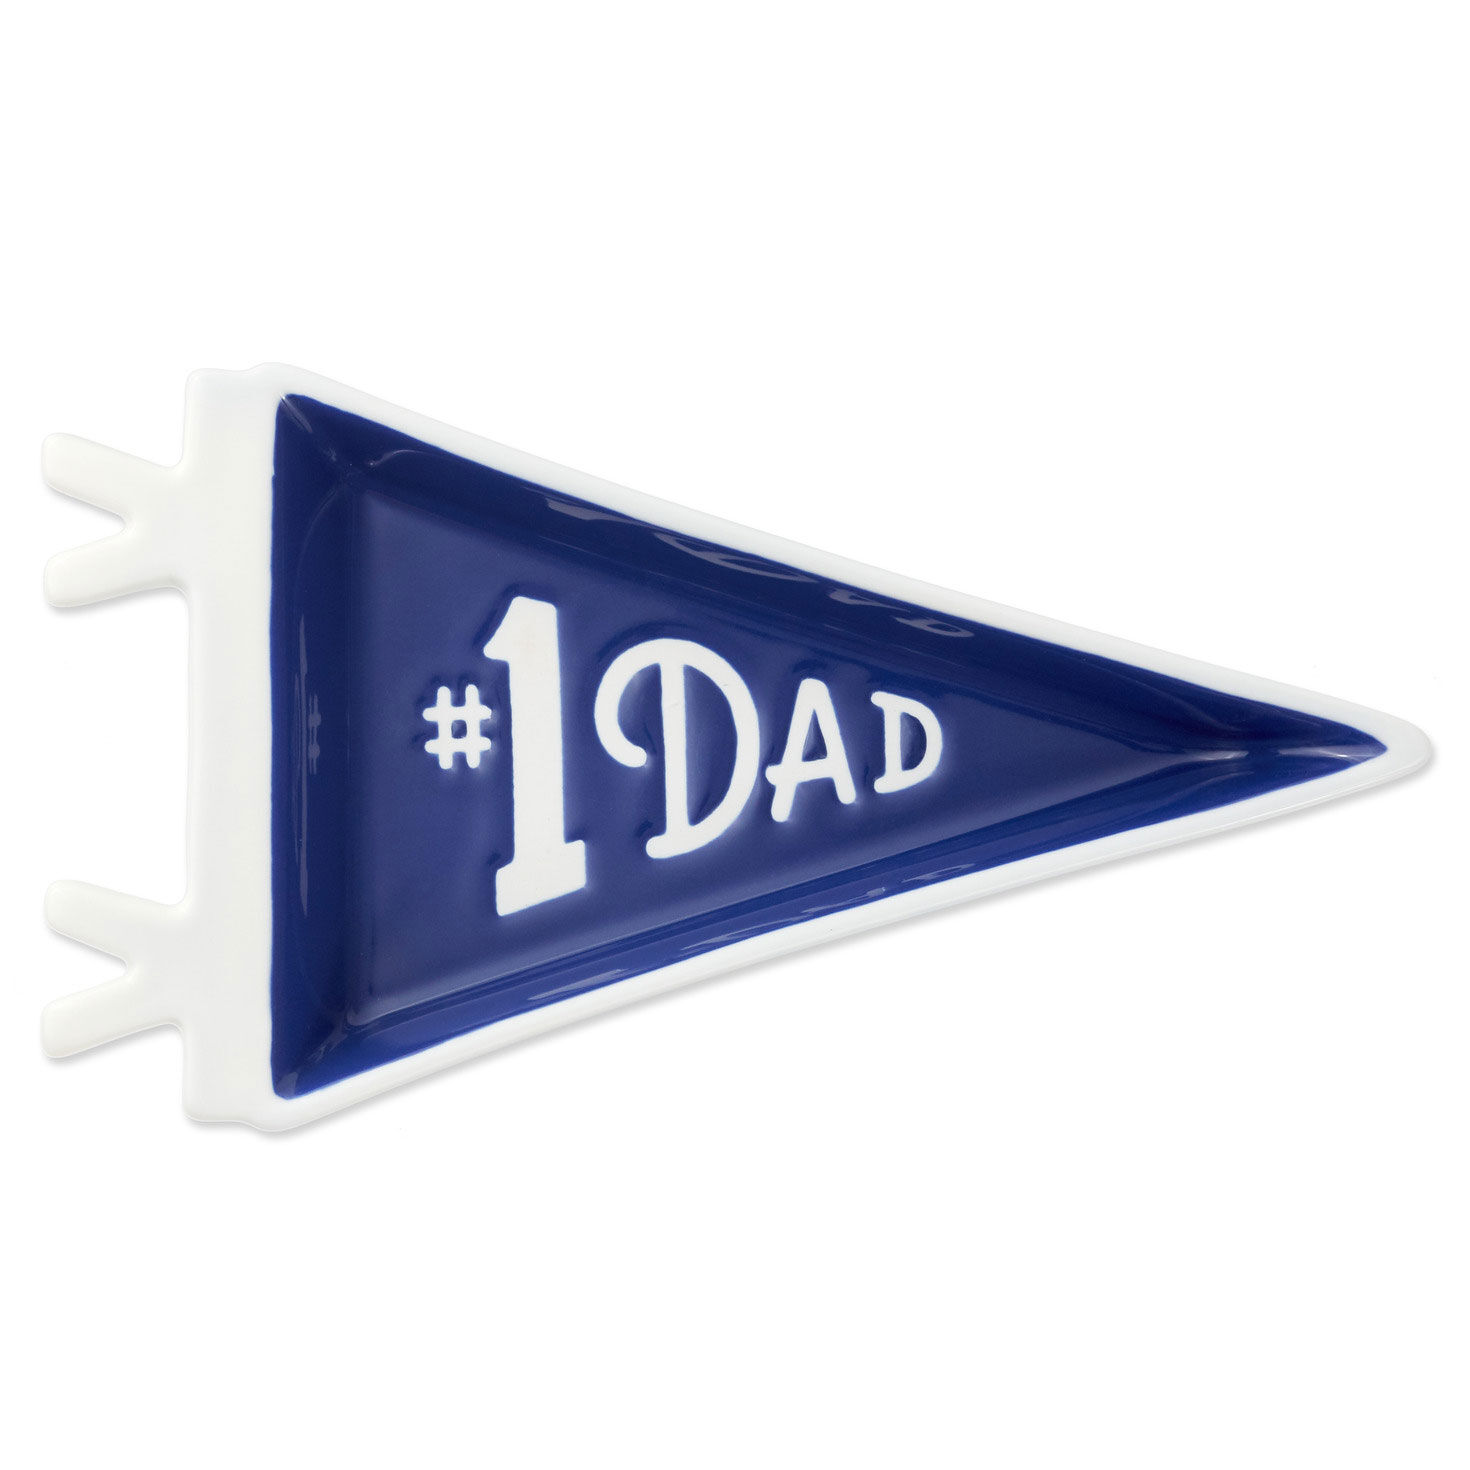 #1 Dad Pennant-Shaped Trinket Tray for only USD 16.99 | Hallmark